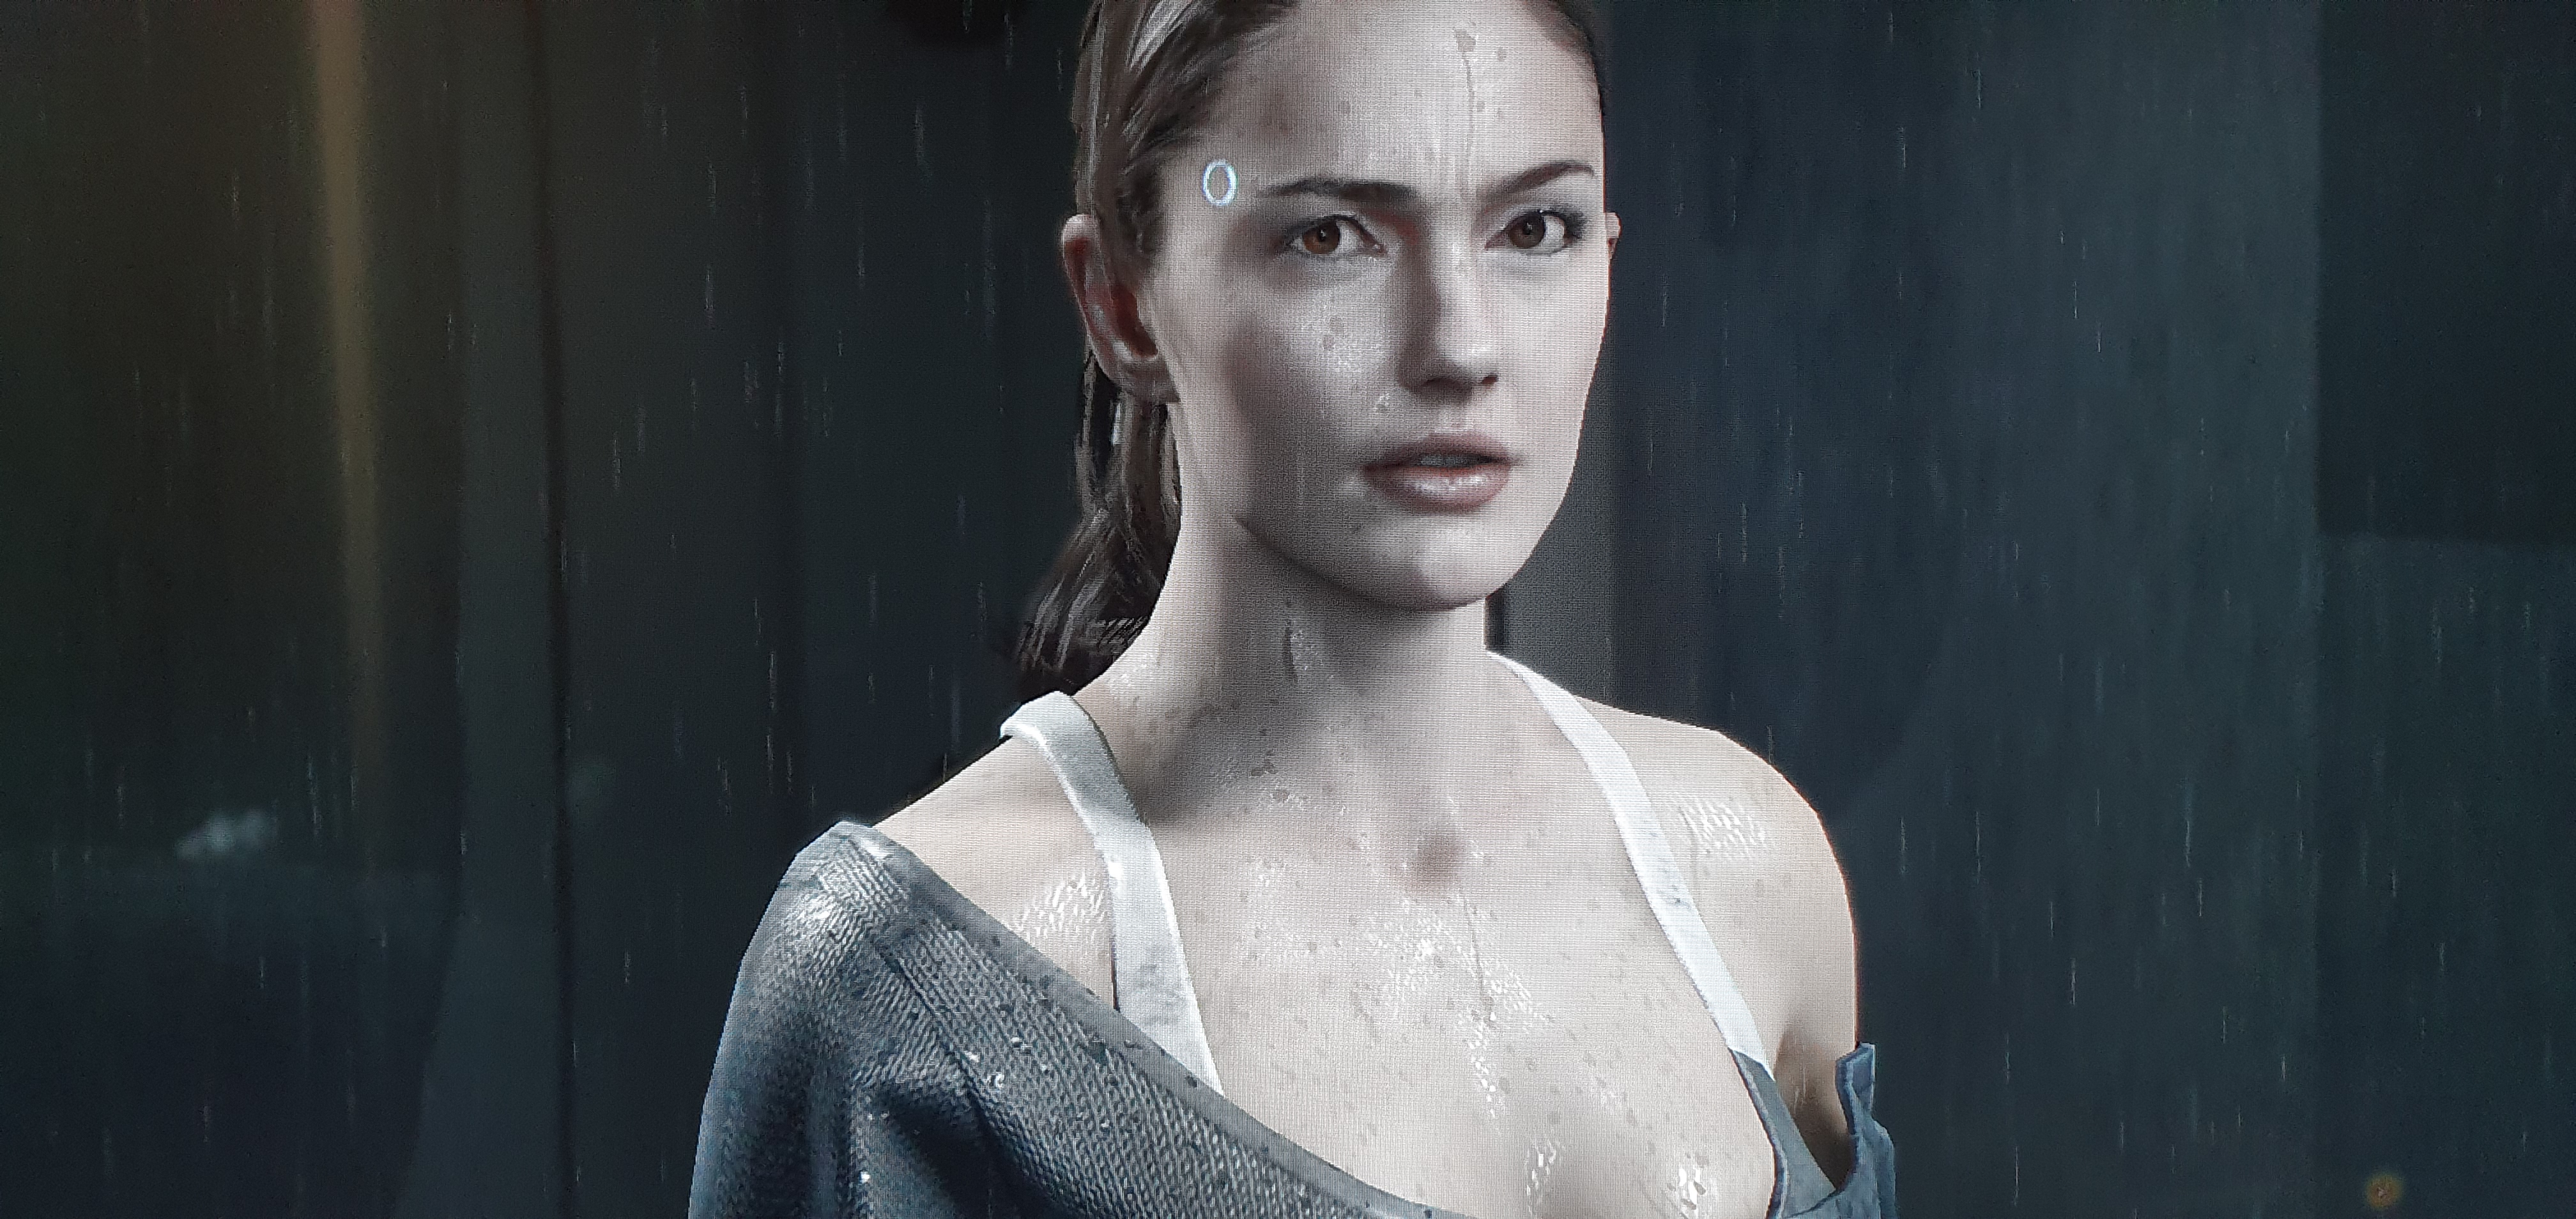 charlotte nightshade recommends detroit become human north actress pic